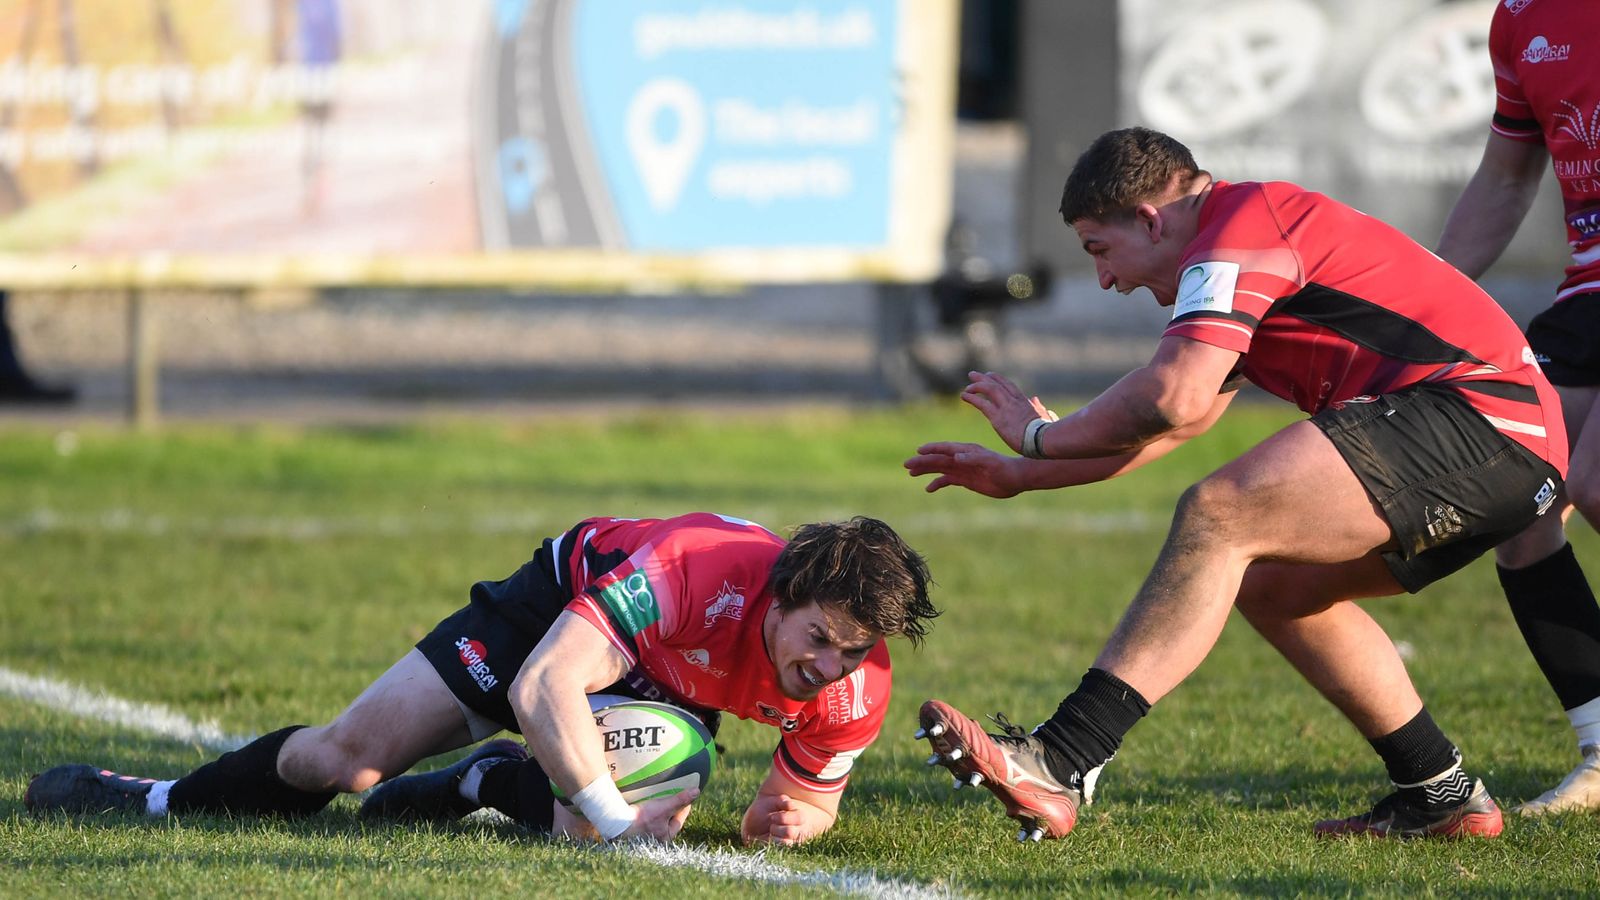 Saracens suffer 17-25 defeat by Cornish Pirates in first game in Greene King Championship